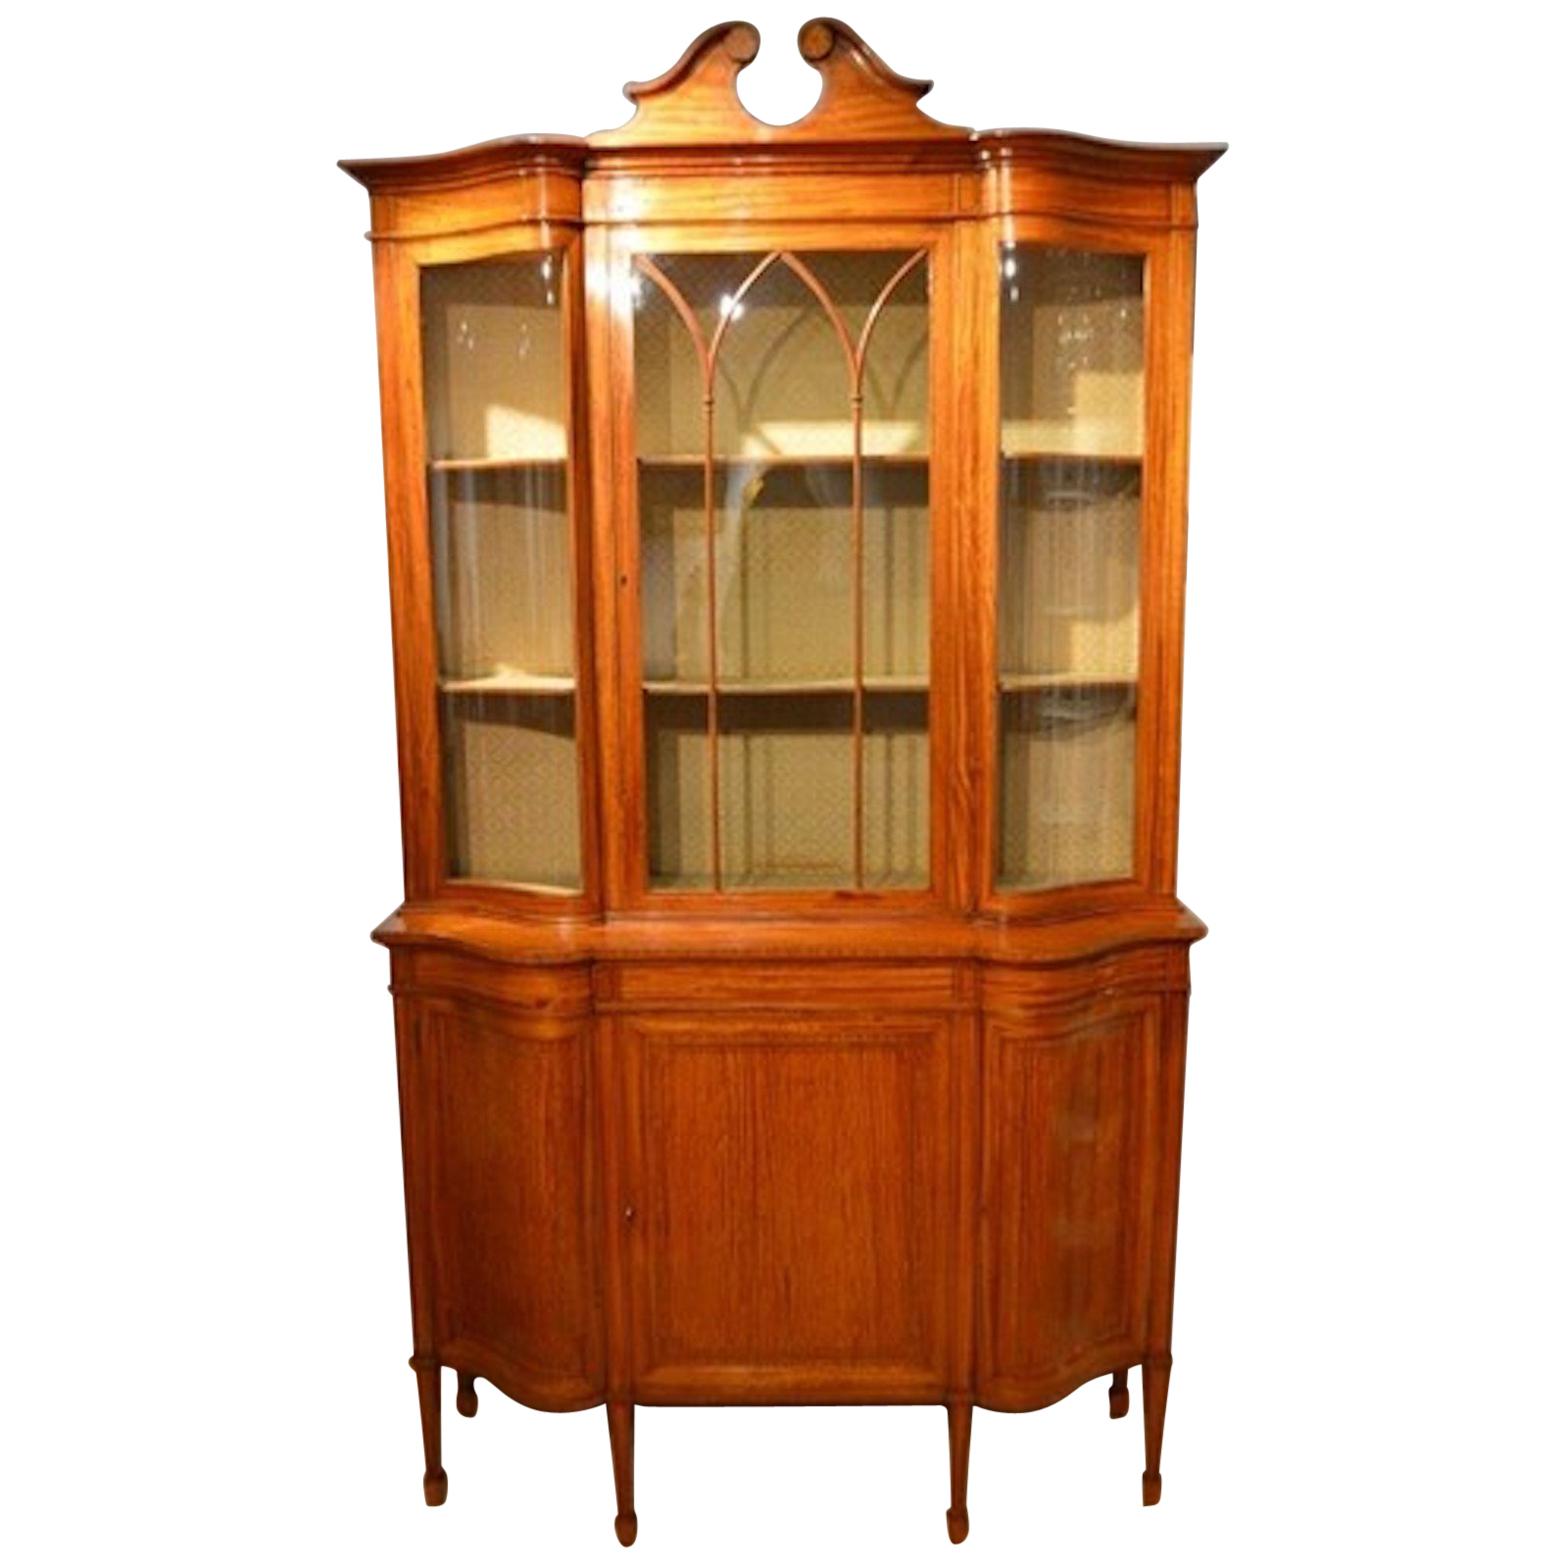 Satinwood Edwardian Period Serpentine Antique Display Cabinet by Maple & Co.